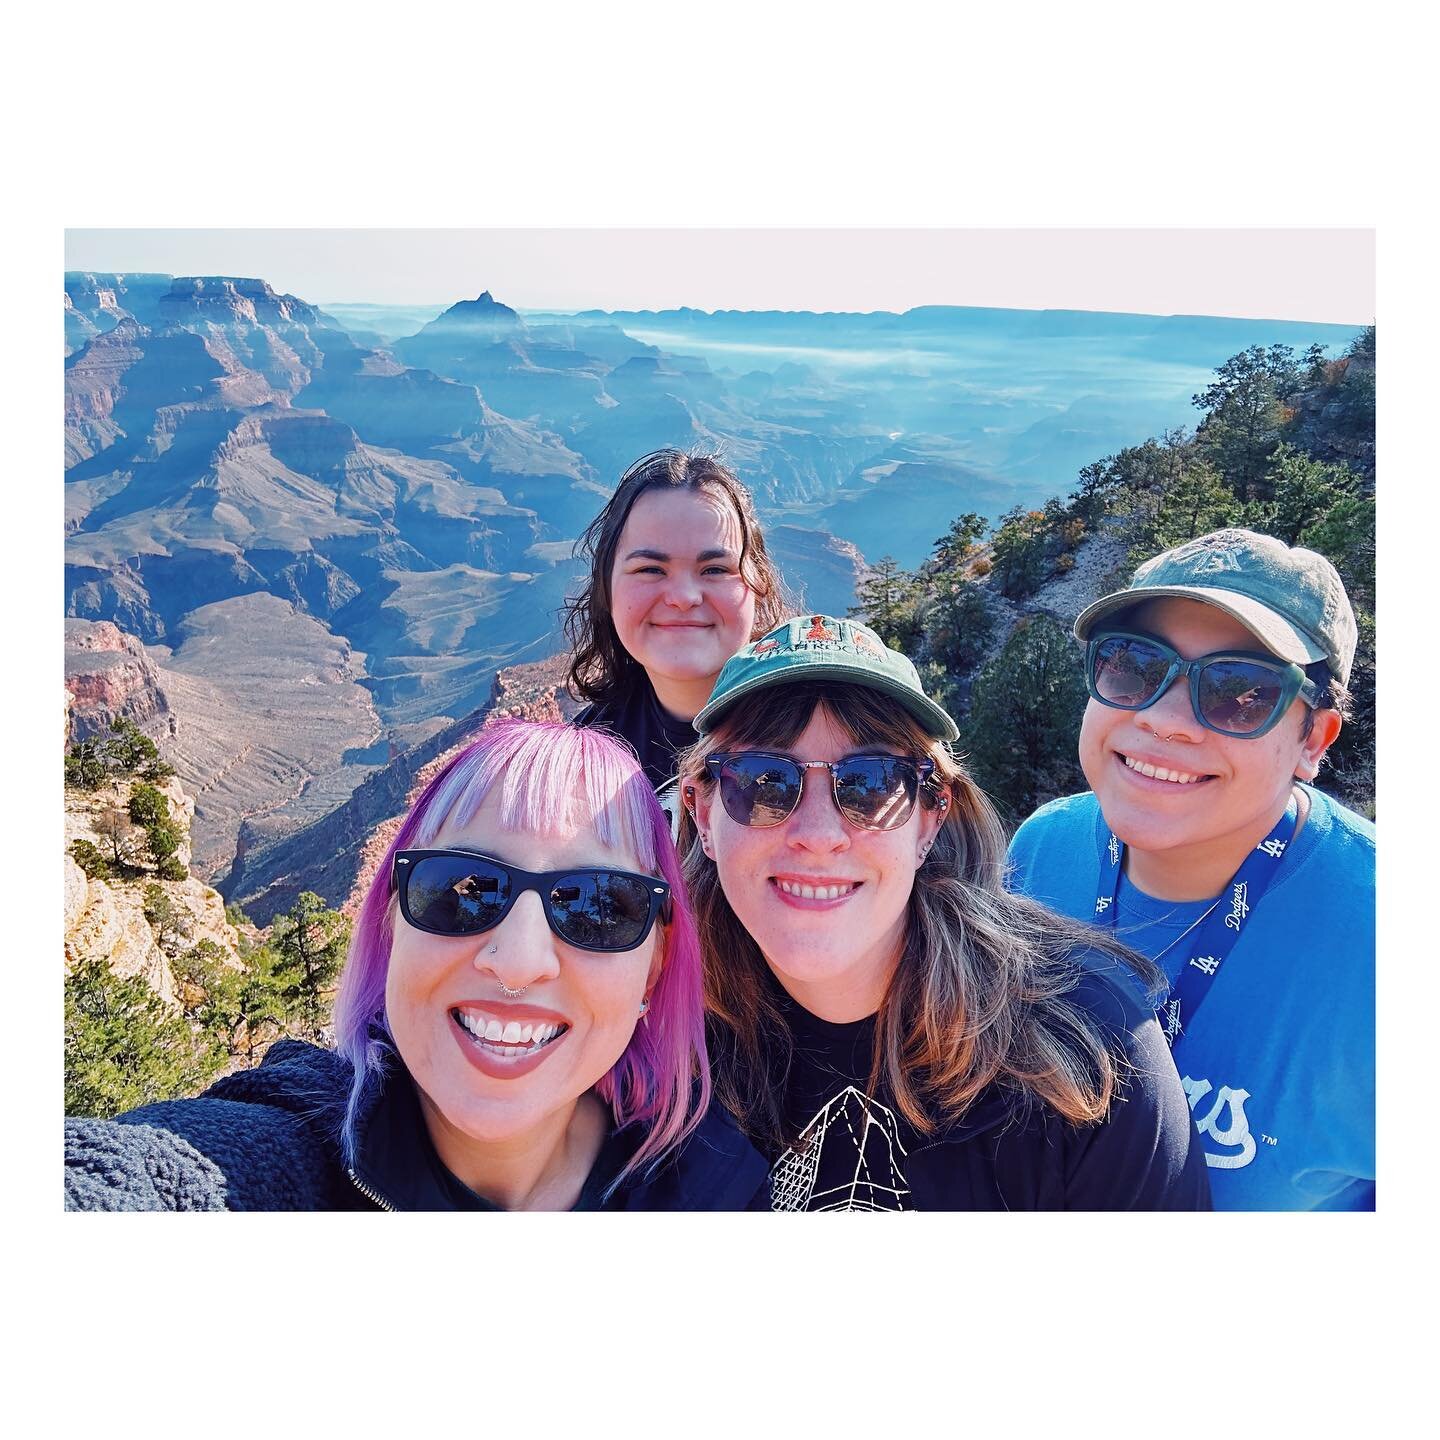 Yet another successful trip driving for Dr. Wilbur&rsquo;s Geology 30E field study - always a good time with great people 🖤
.
.
.
.
.
#grandcanyon #grandcanyonnationalpark #pccgeology #geologynerds #geologystudents #fieldstudy